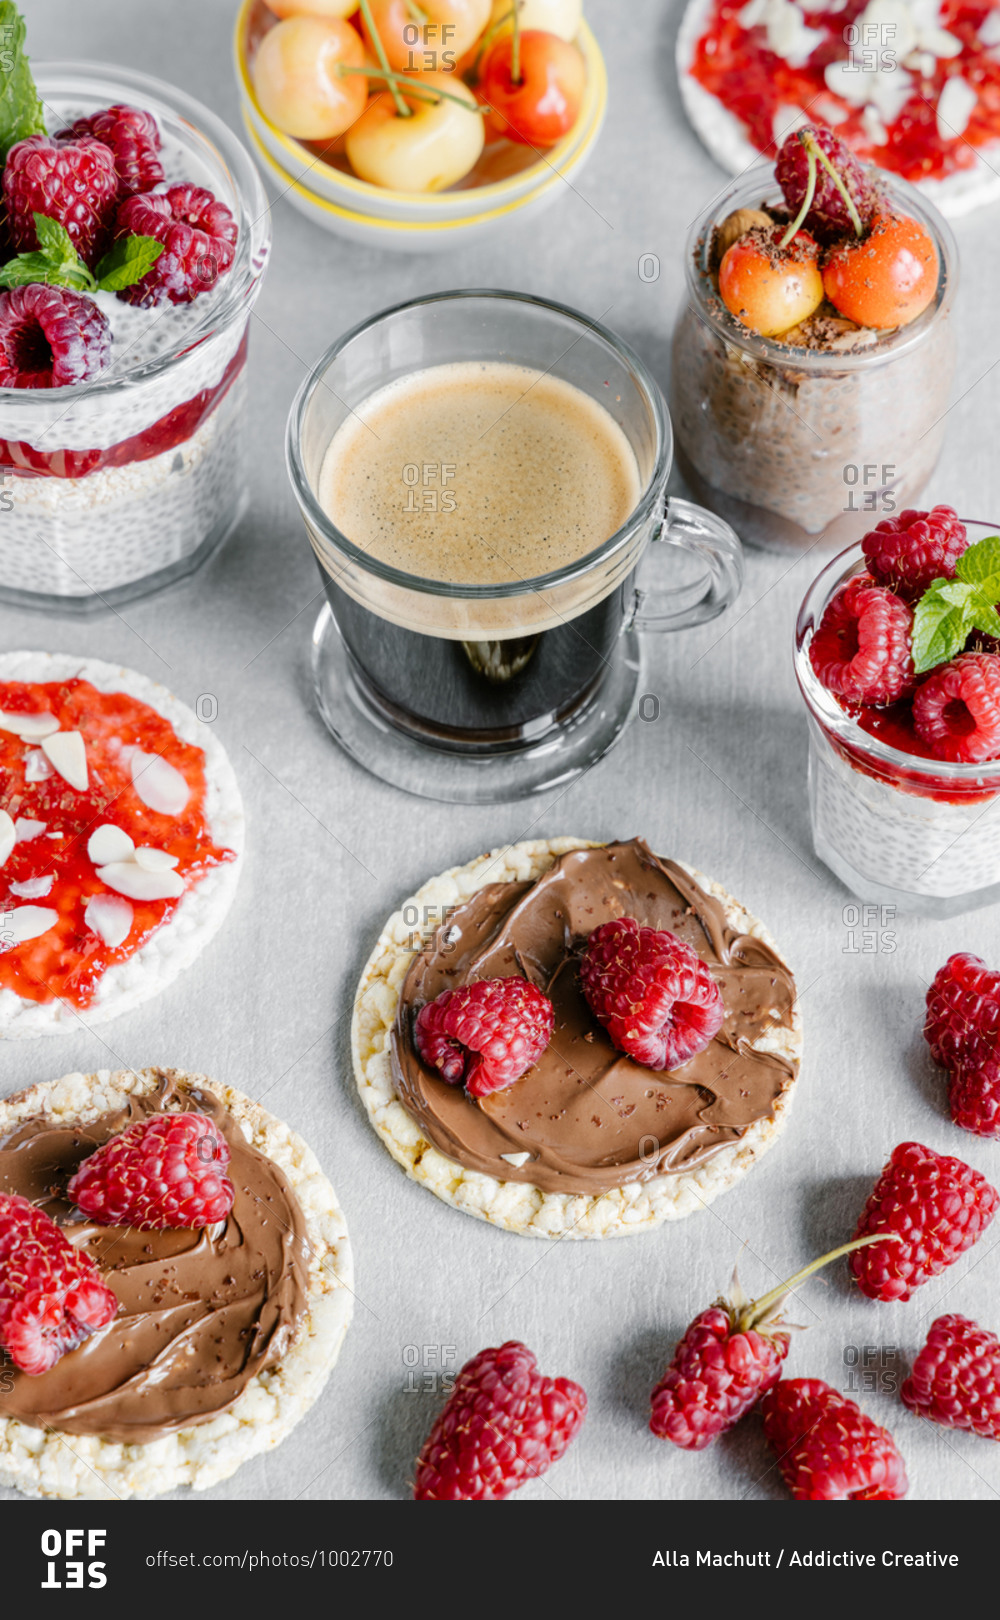 High angle of glass cup of coffee with chia pudding garnished with raspberries and white cherries with wheat crispbreads with nut spread and jam with almond pieces